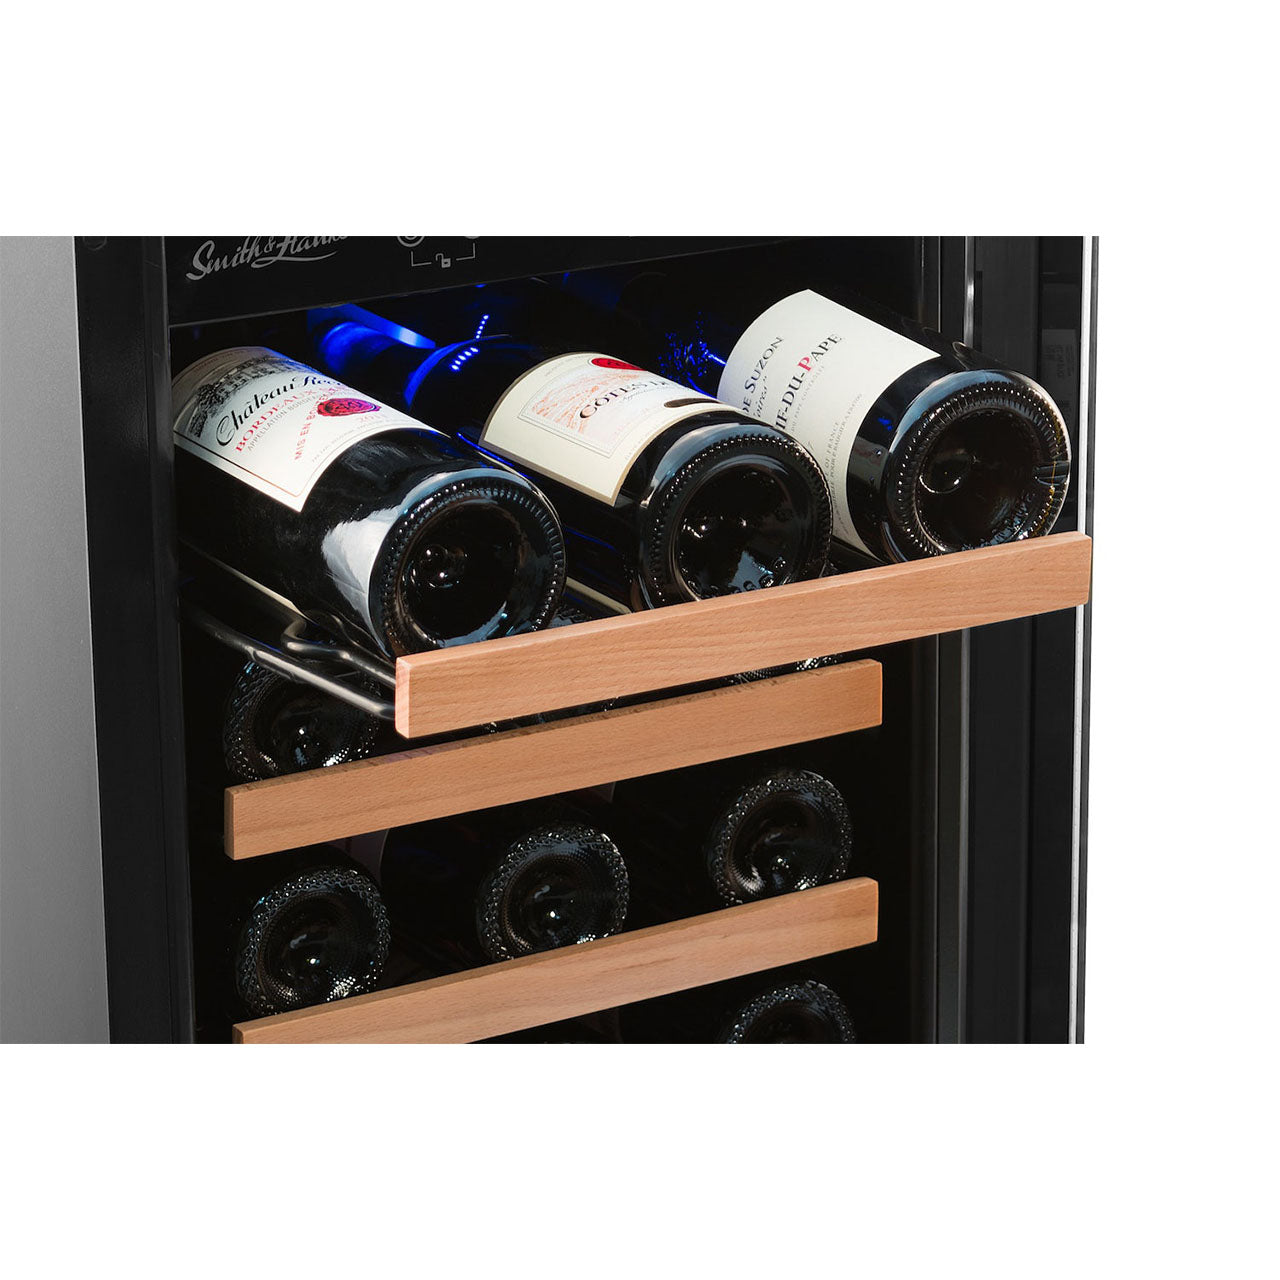 Smith & Hanks 15" Dual Zone Wine Cooler | Holds 32 Bottles | RW88DR